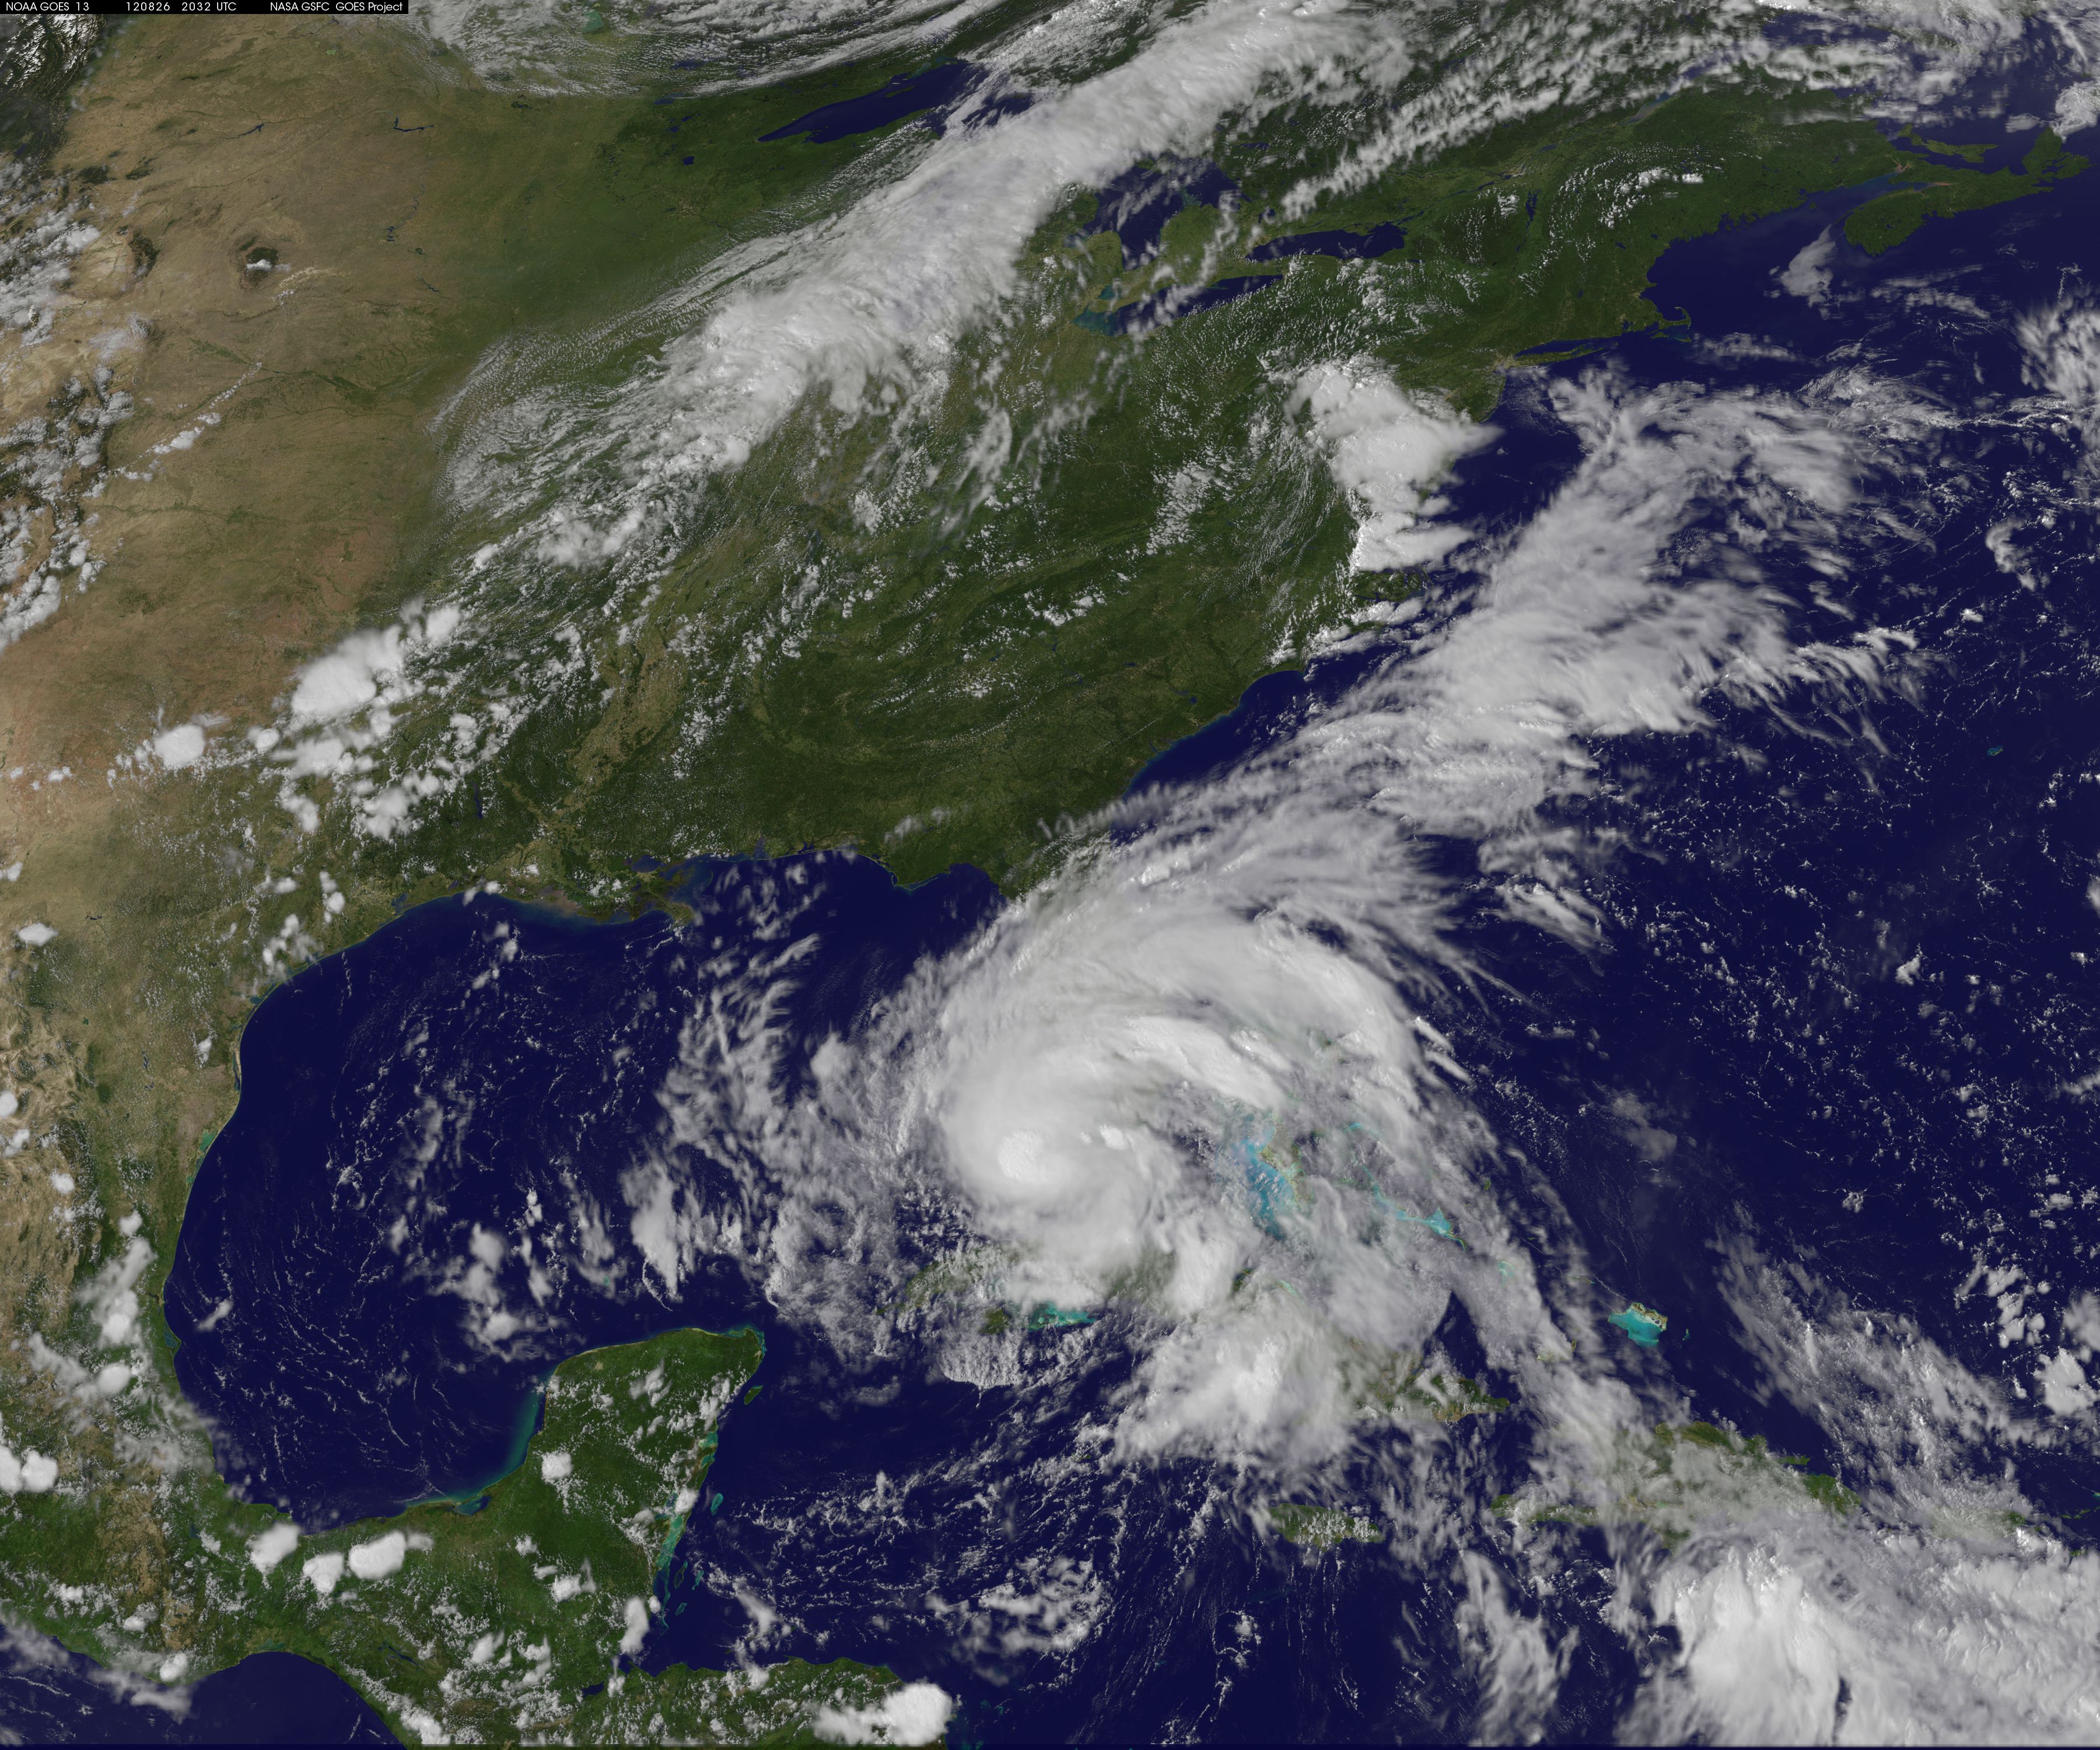 As Isaac moves into warm water, threat shifts to northern Gulf - CNN.